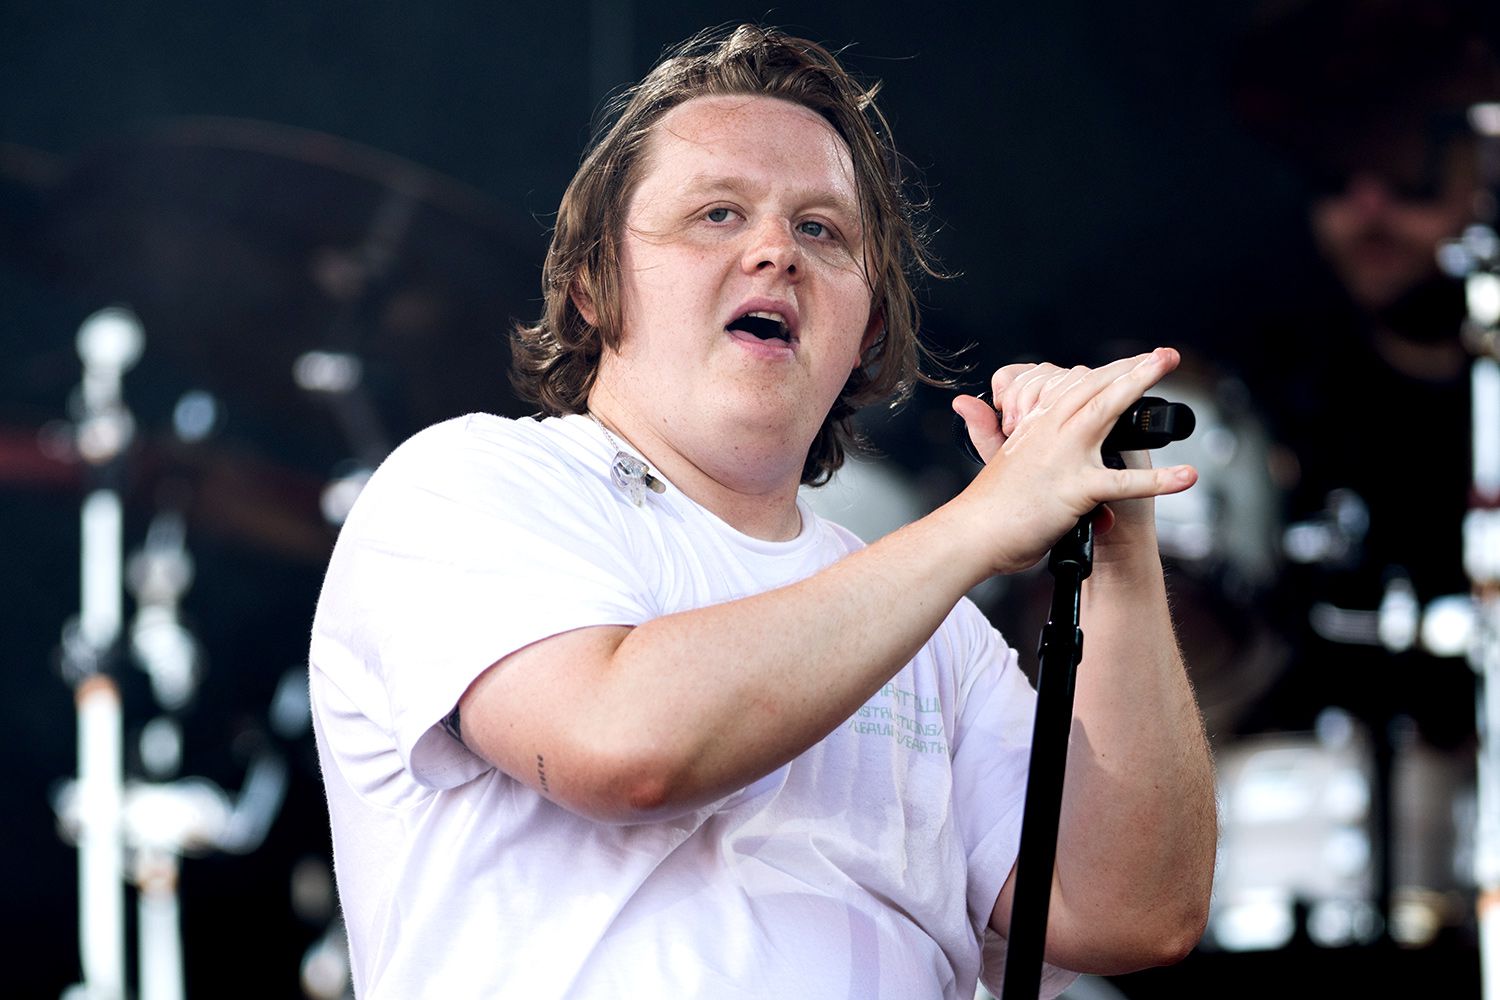 Lewis-Capaldi-Taking-Break-From-Touring-to-Get-Mental-and-Physical-Health-in-Order-062723-1-2a7c5942e3ac46cfb5948d00e3868ff4